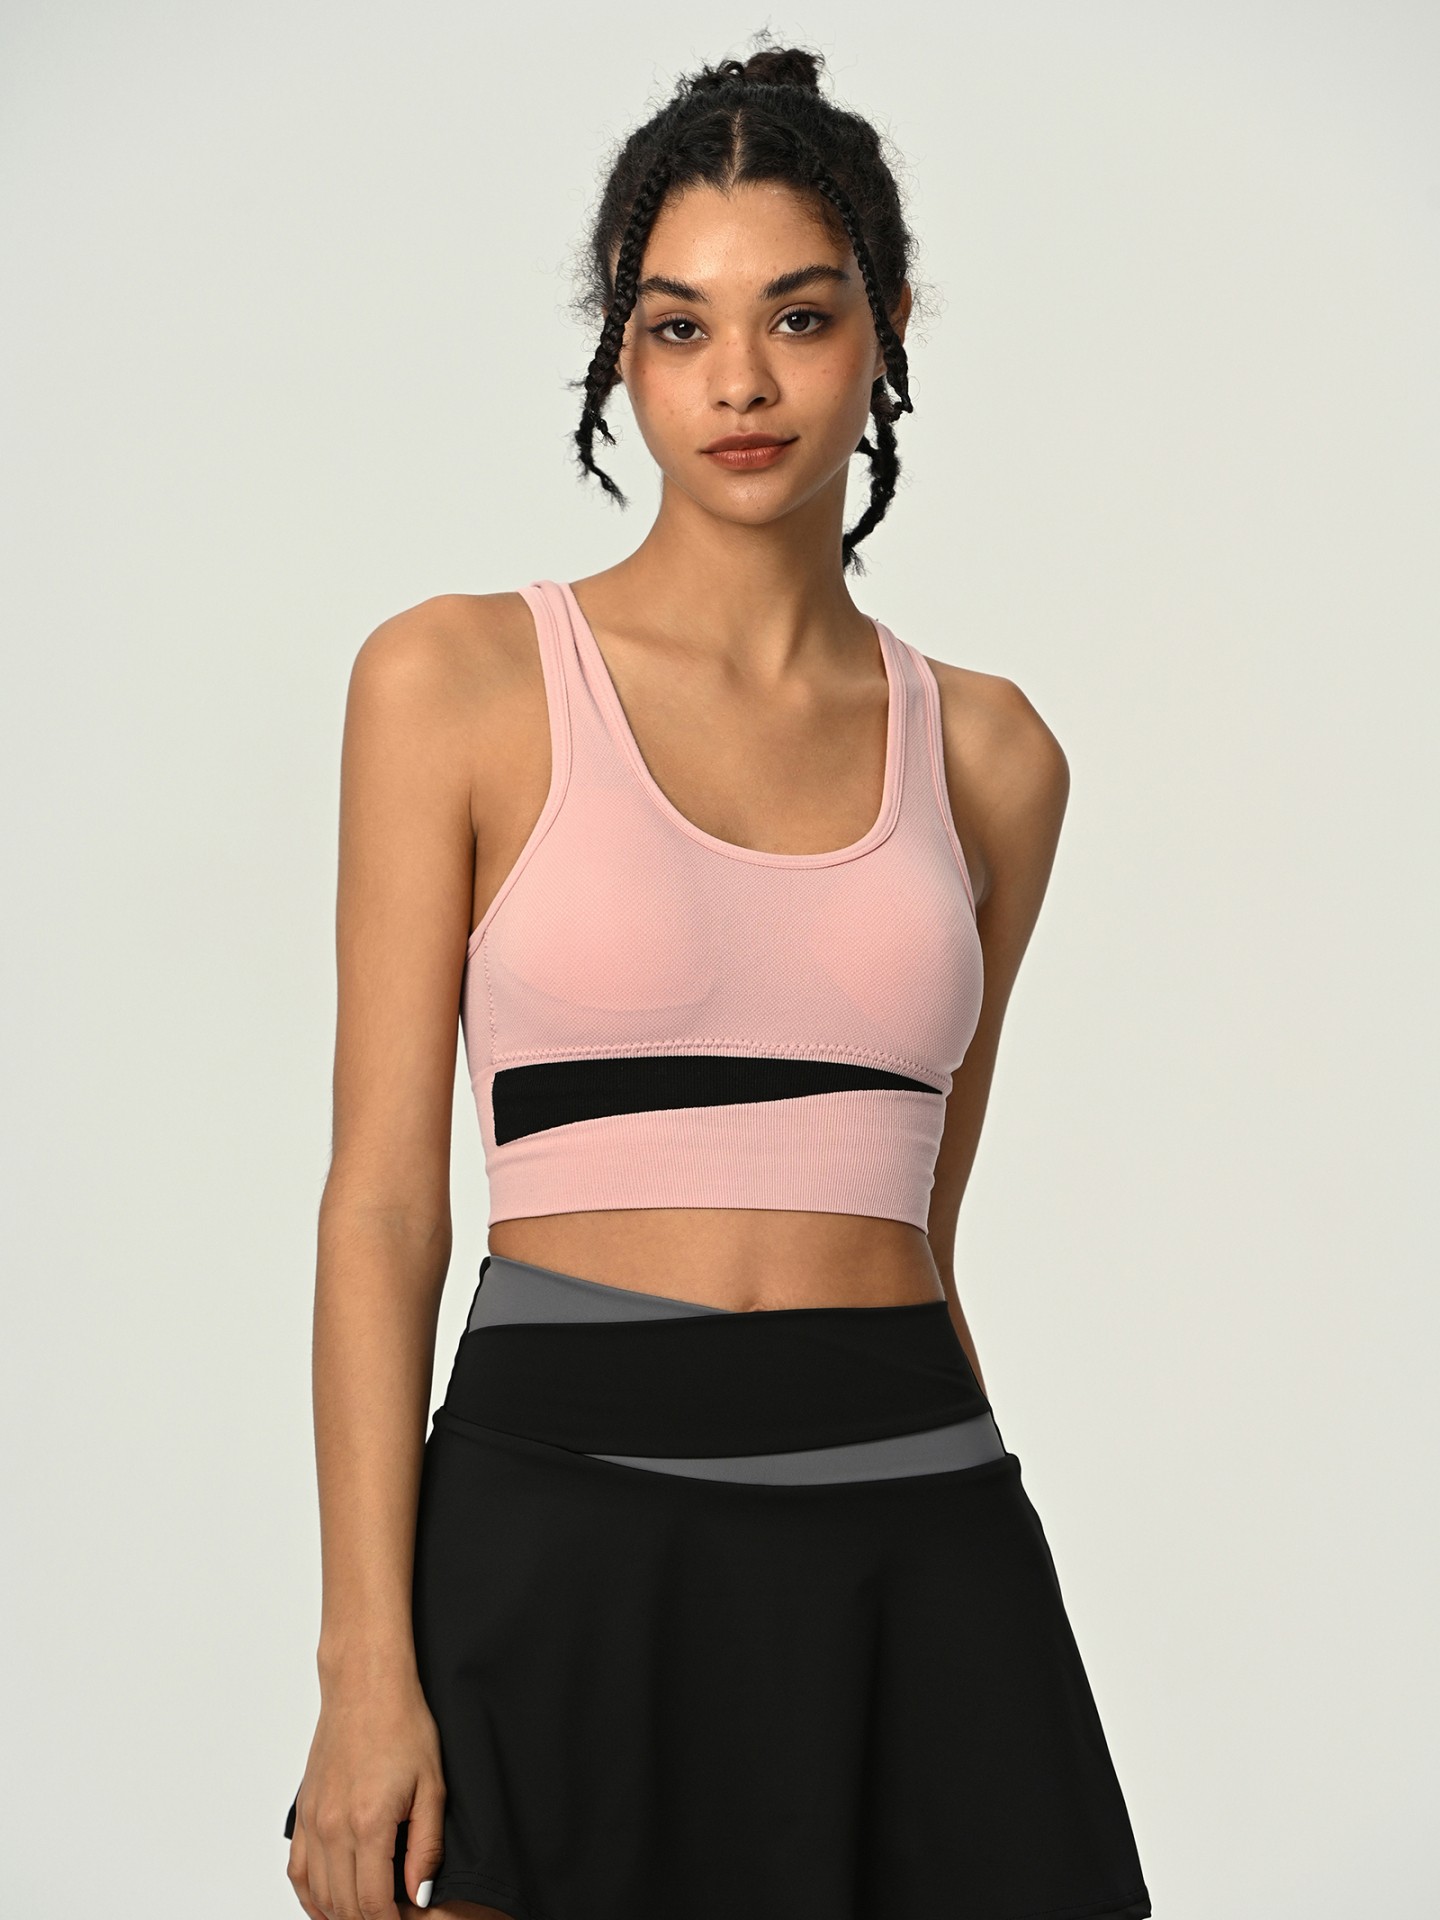 URBANIC Grey Lightly Padded Sports Bra Price in India, Full Specifications  & Offers